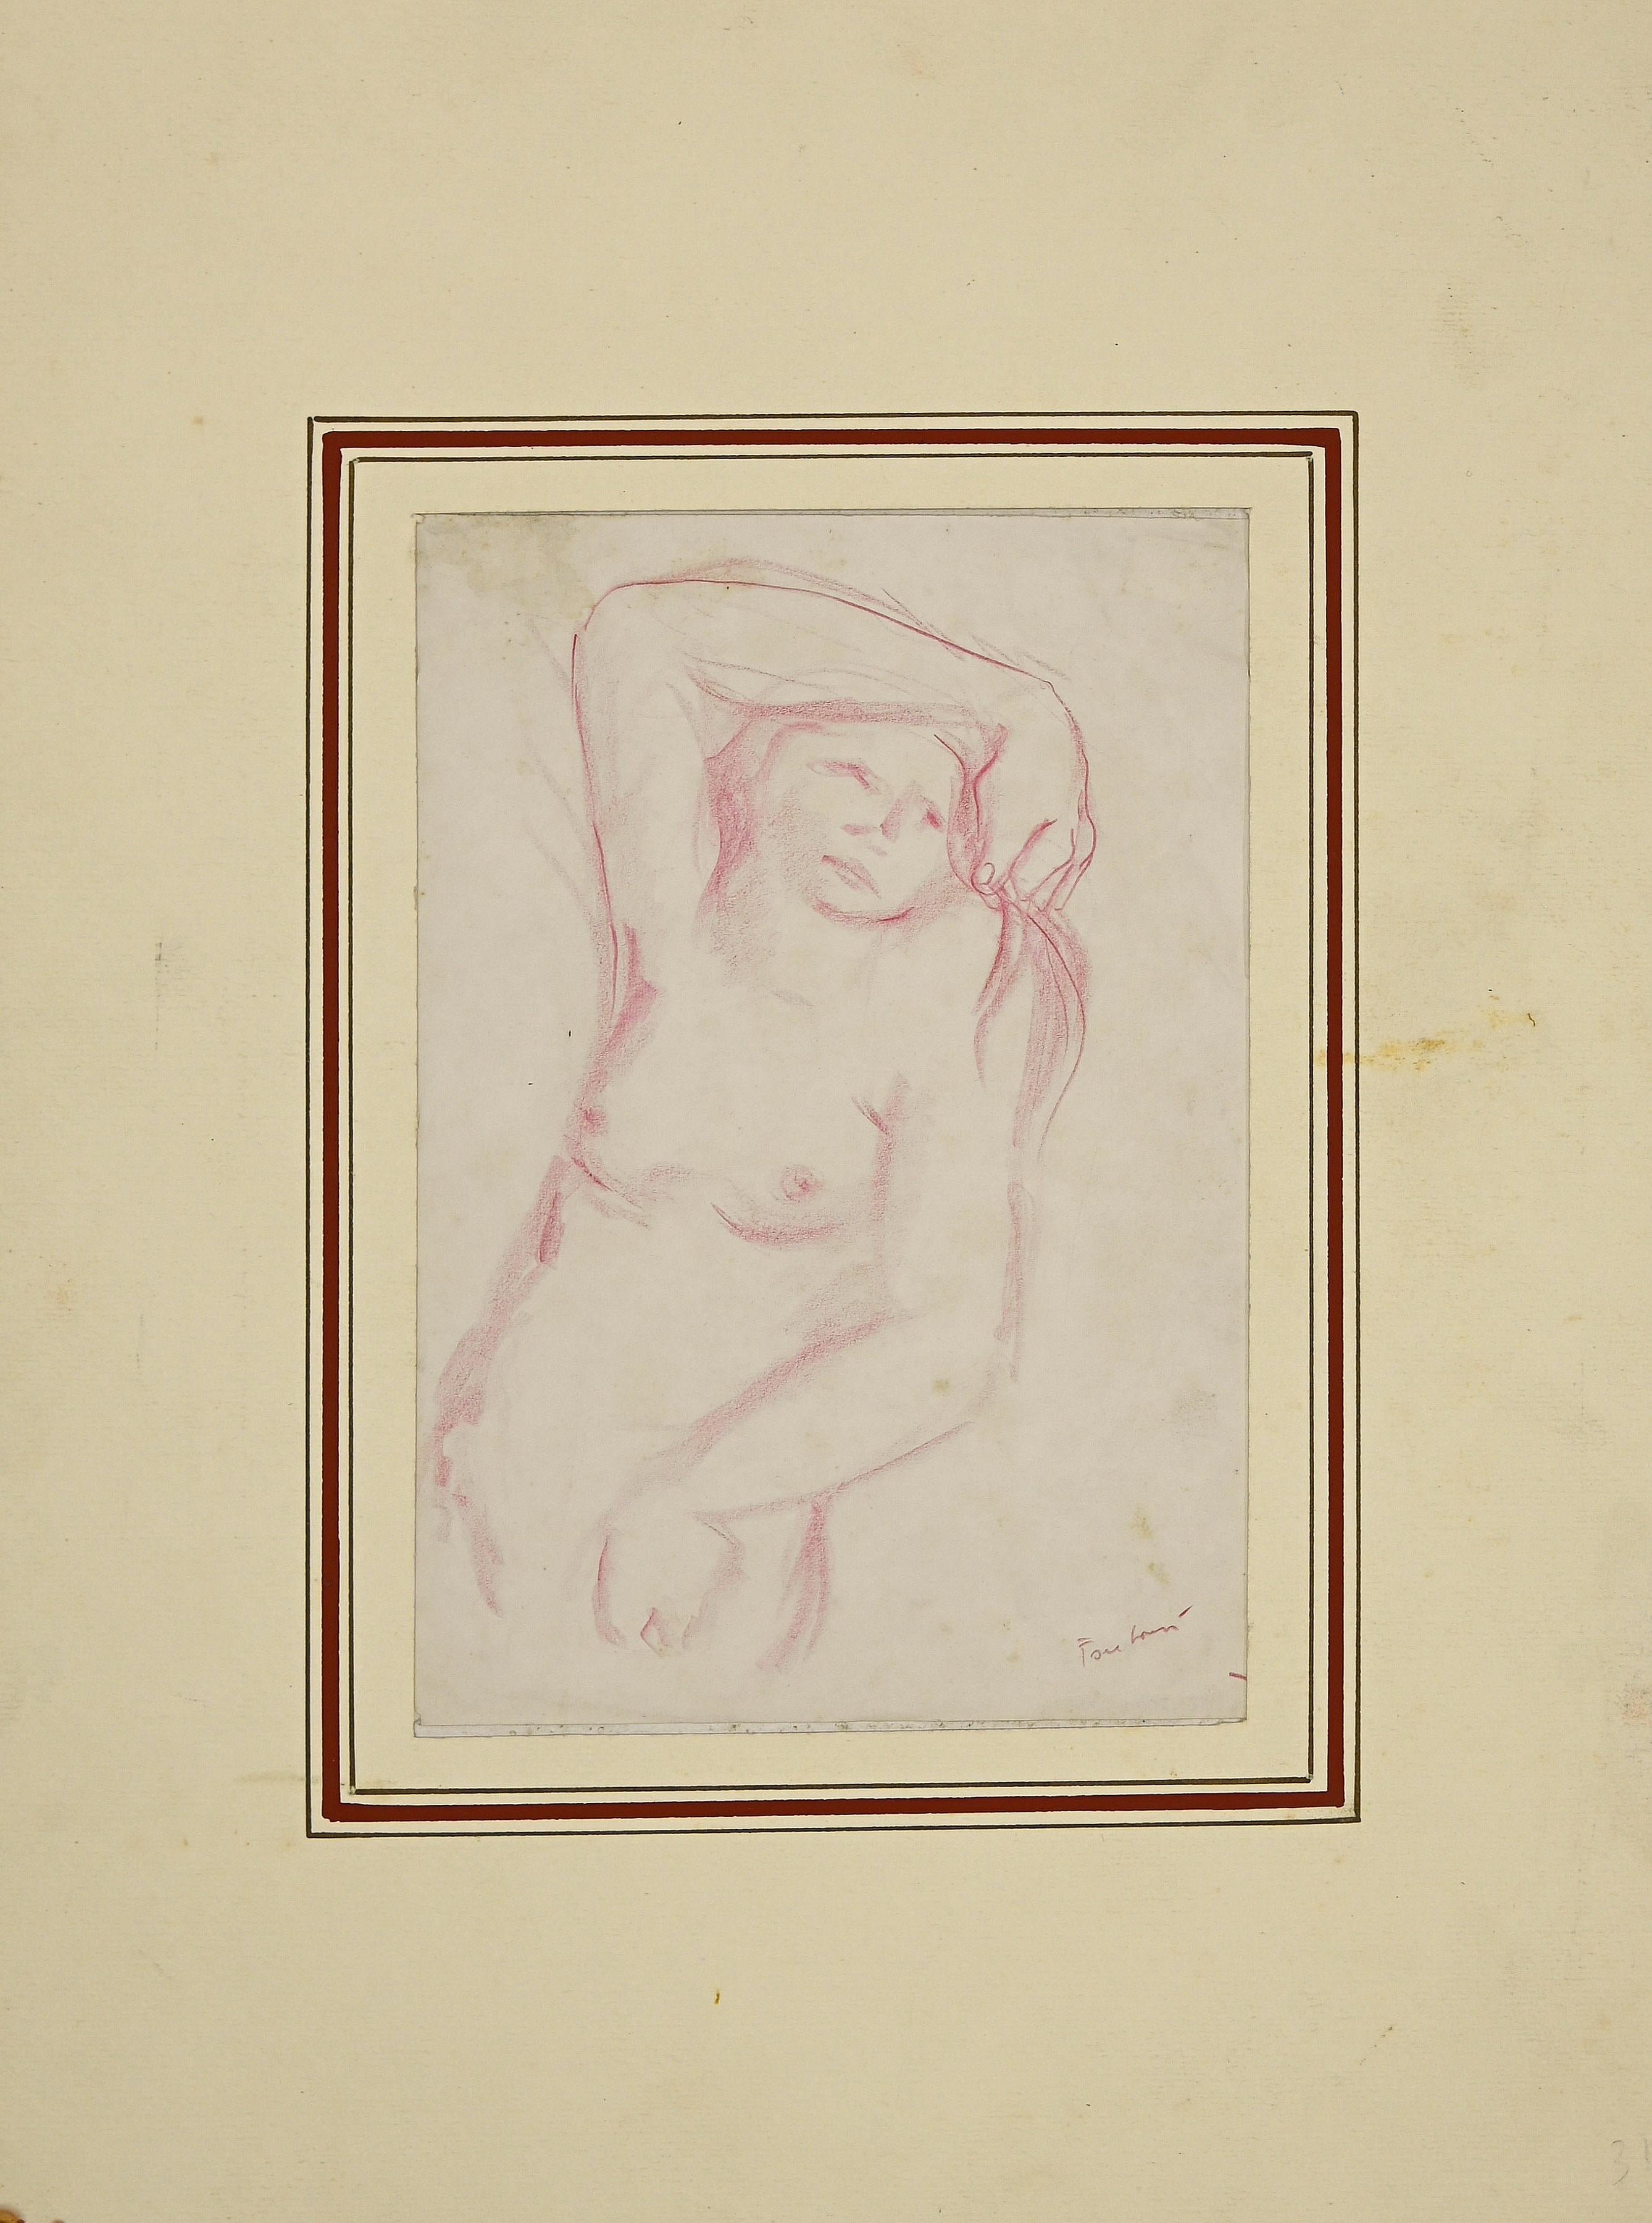 Nude of Woman is a pastel drawing on ivory-colorated paper by Voltolino Fontani (1920-1976).

In good conditions.

This is an original drawing representing a beautiful nude of woman.

Hand-signed on the lower right margin.

Voltolino Fontani